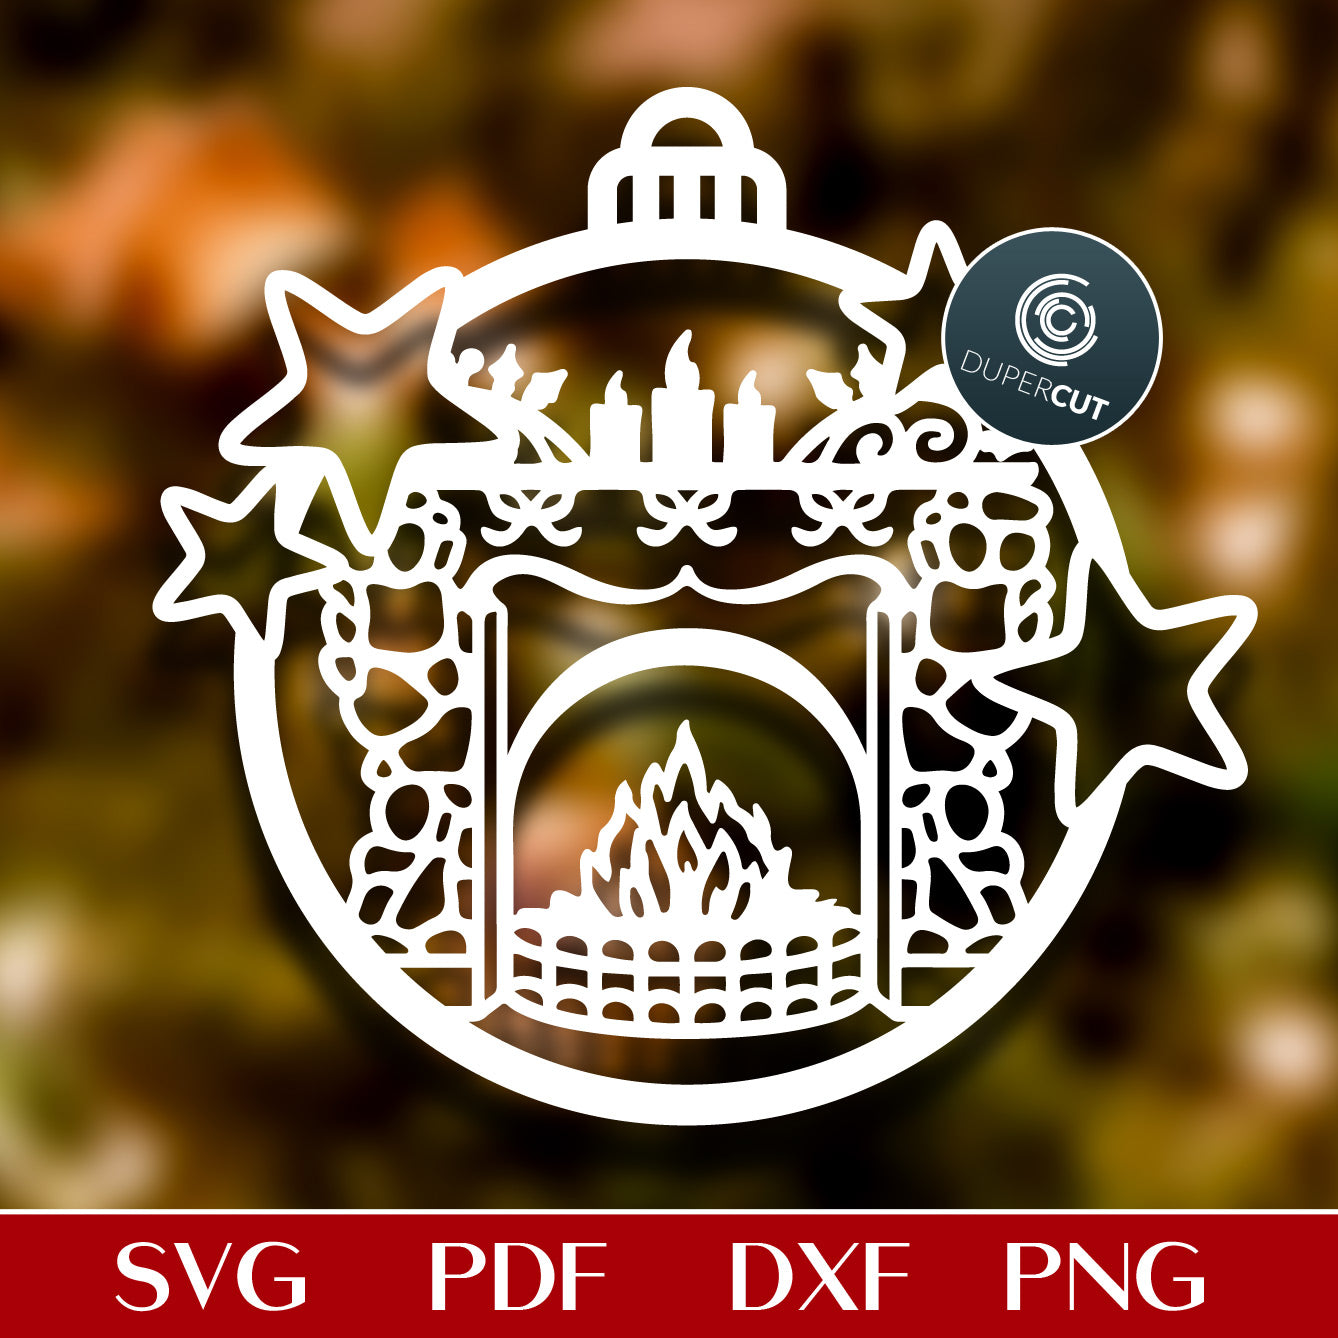 Christmas fireplace ornament - paper cutting template - SVG DXF PDF vector files for laser engraving and cutting, Glowforge, Cricut, Silhouette Cameo